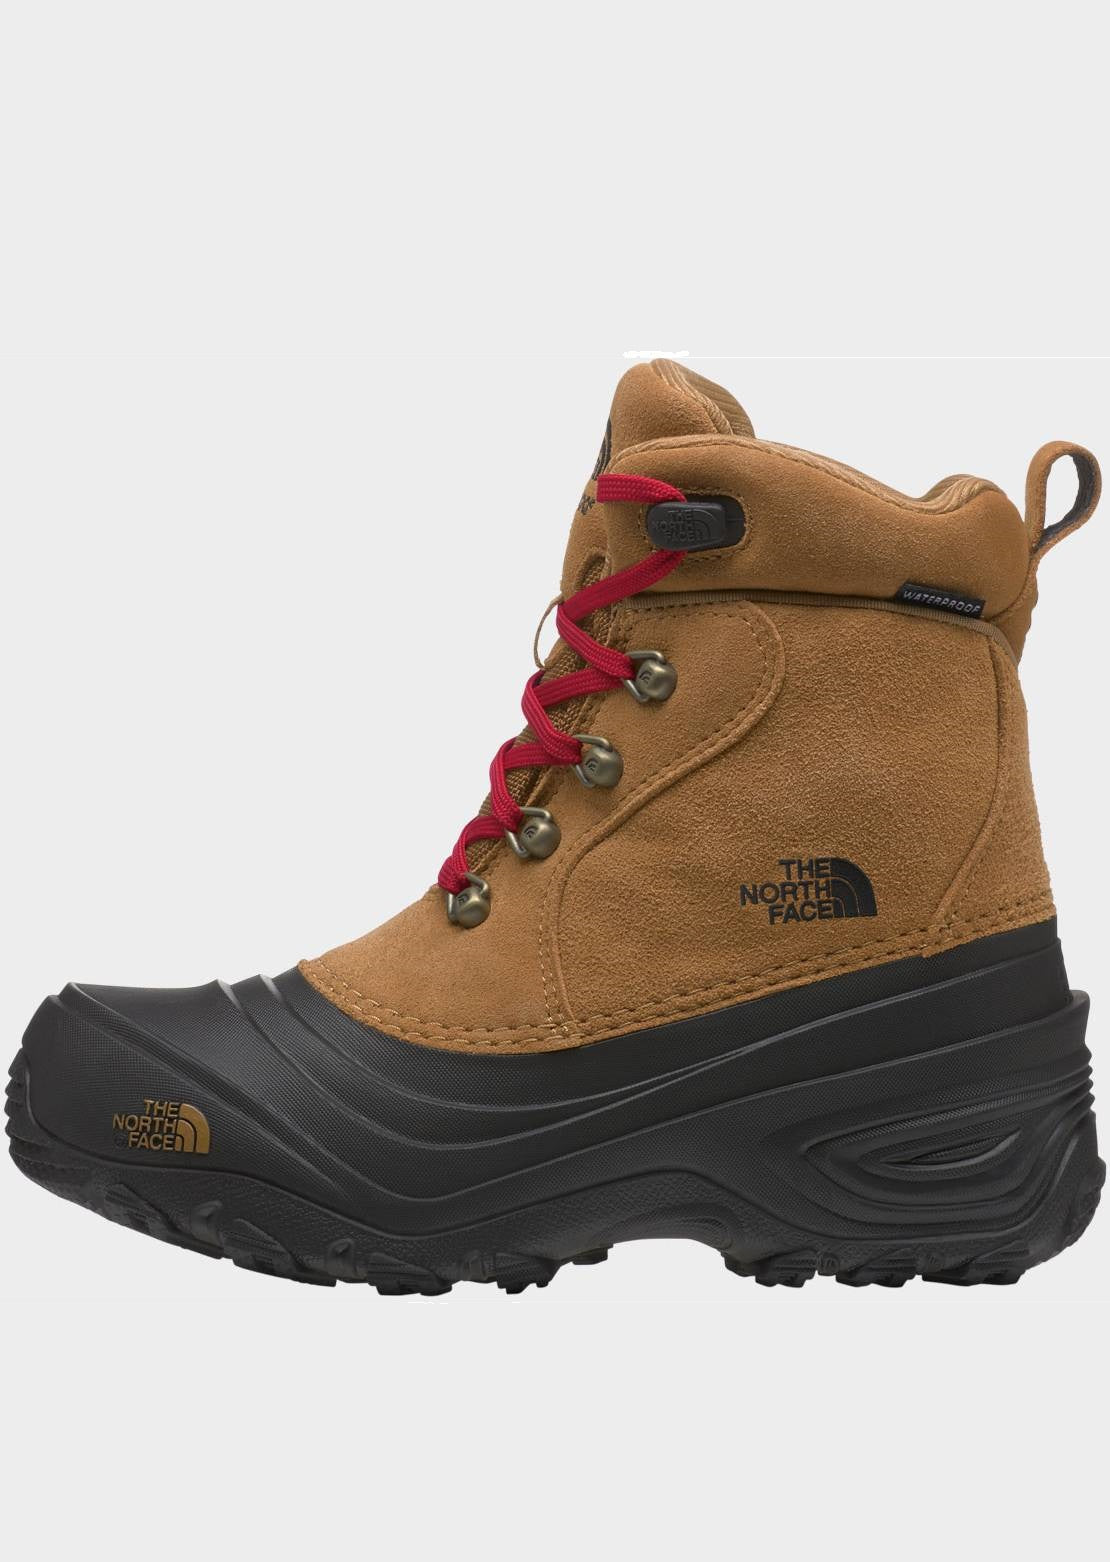 The North Face Junior Chilkat V Lace WP Boots - PRFO Sports